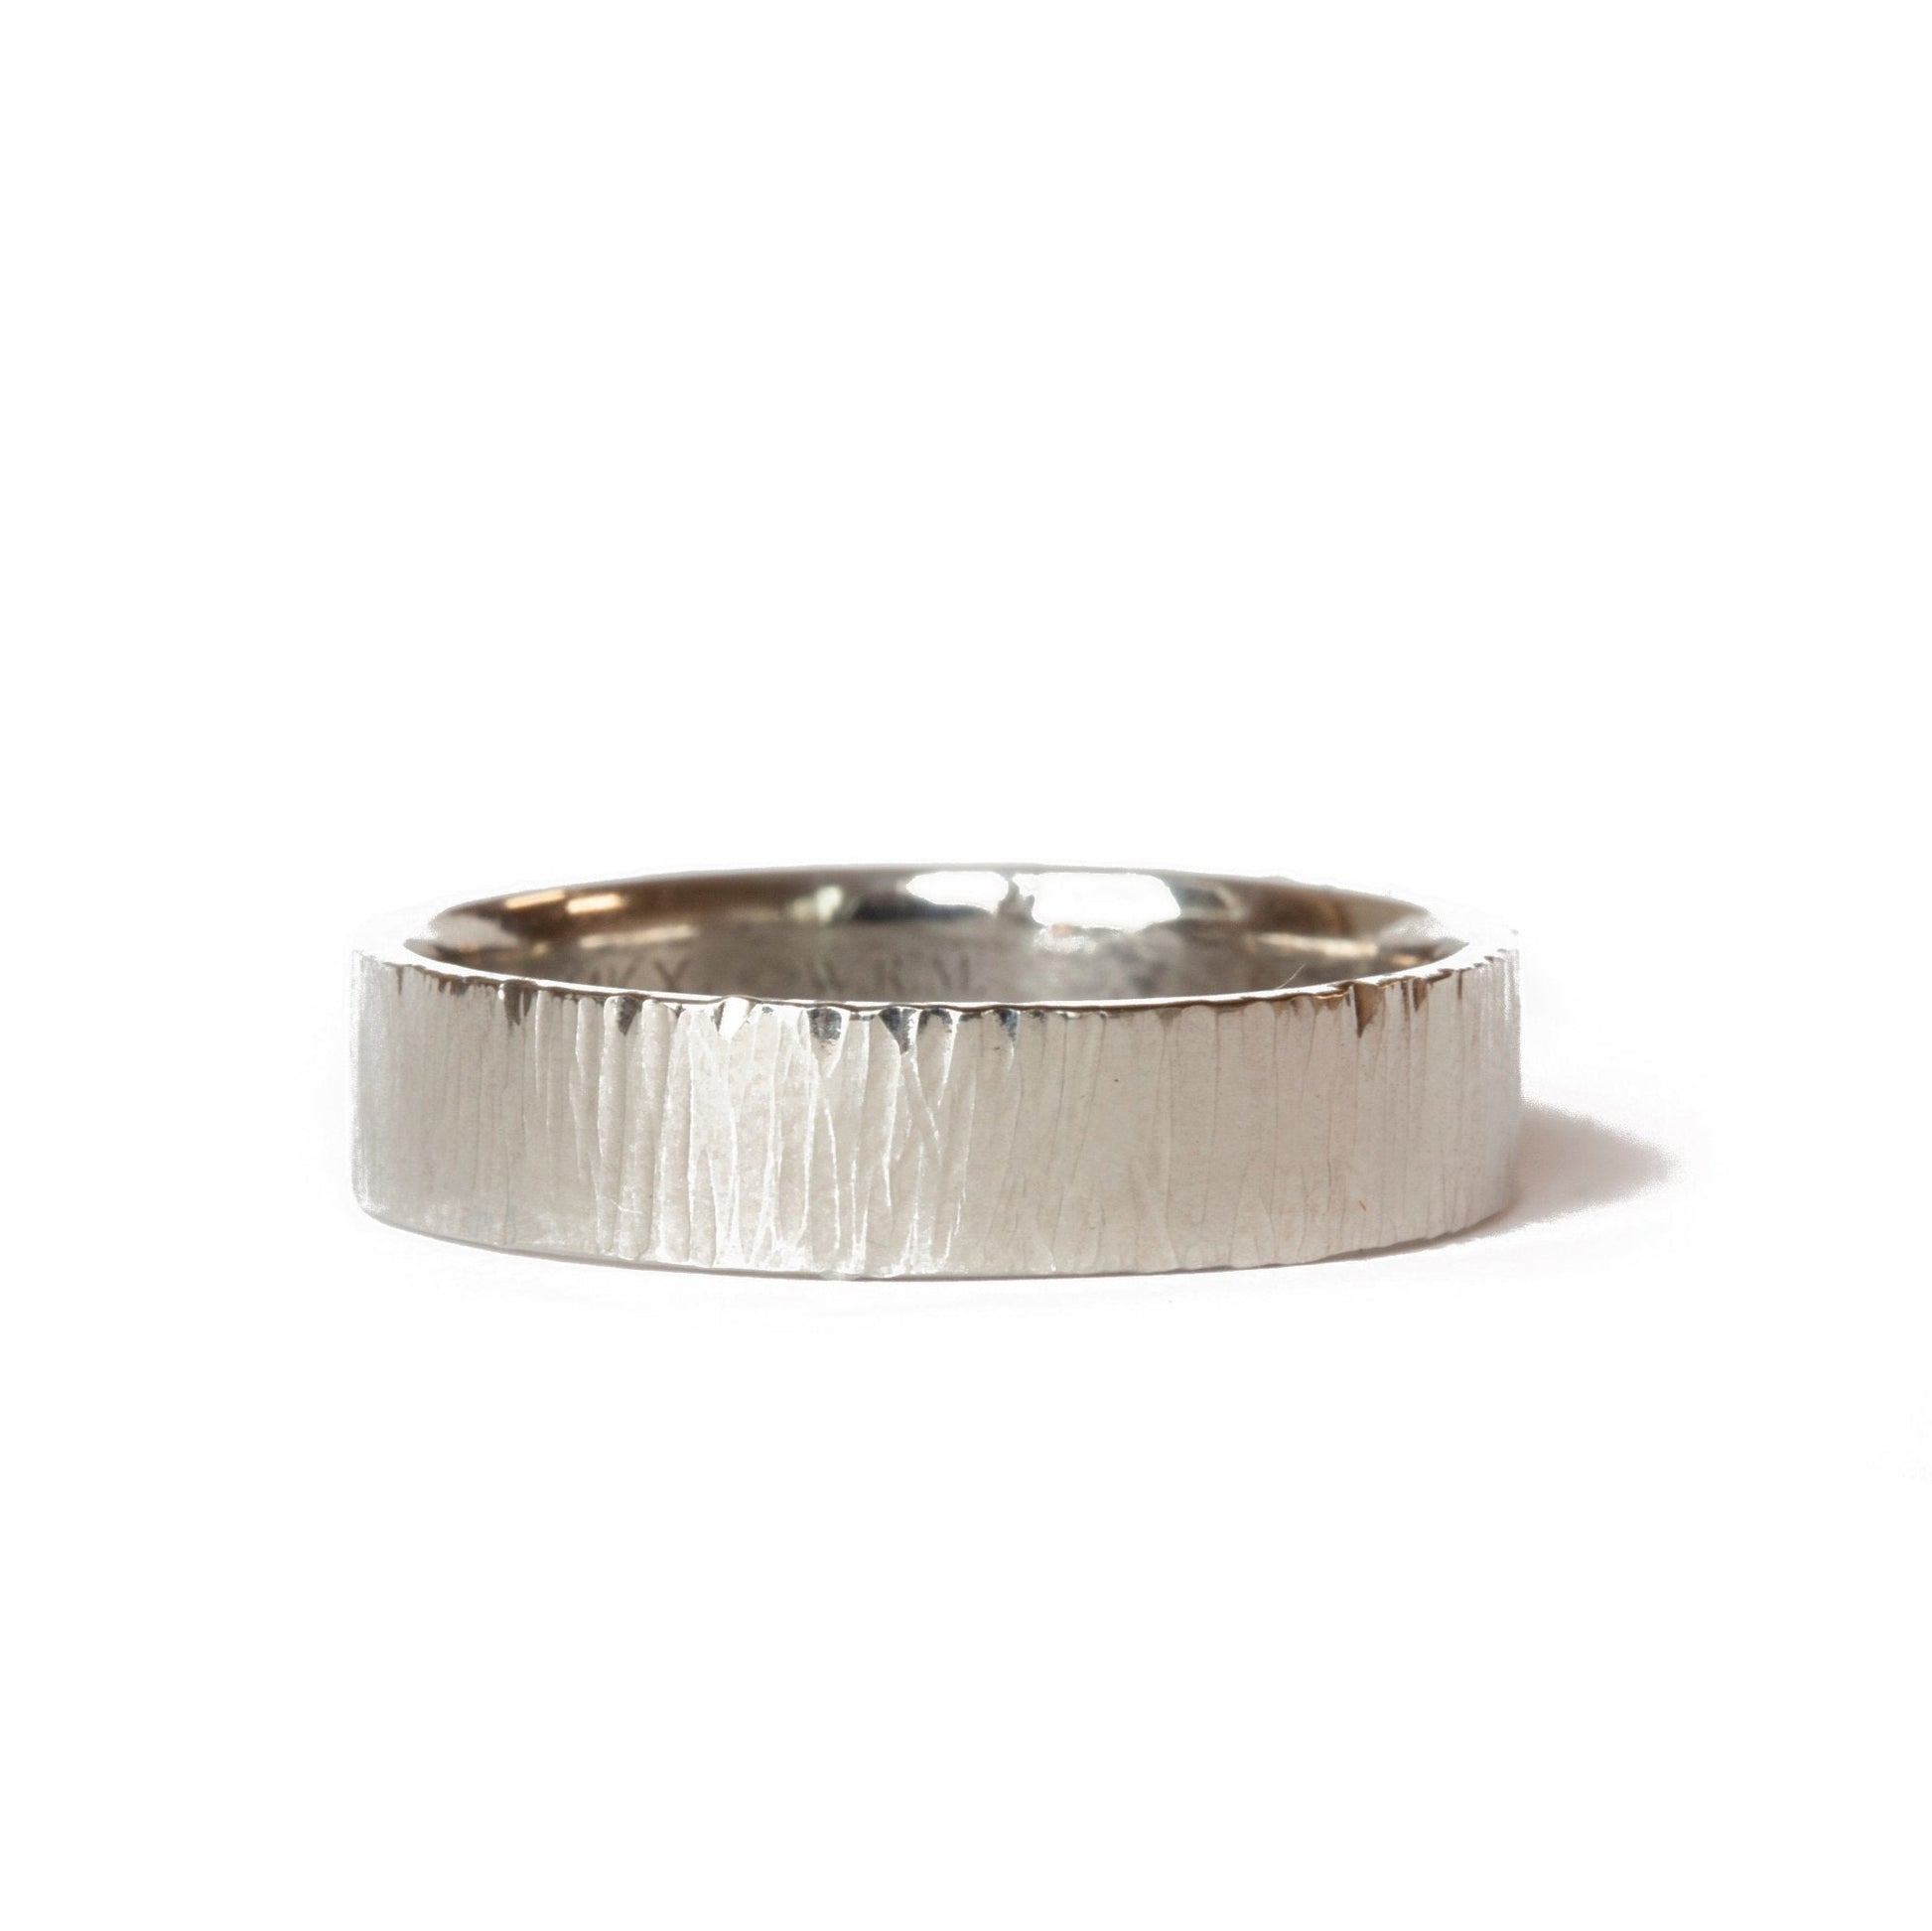 The Thatched Band (Ready to ship in 5mm width 14K white gold size 10.75) - W.R. Metalarts